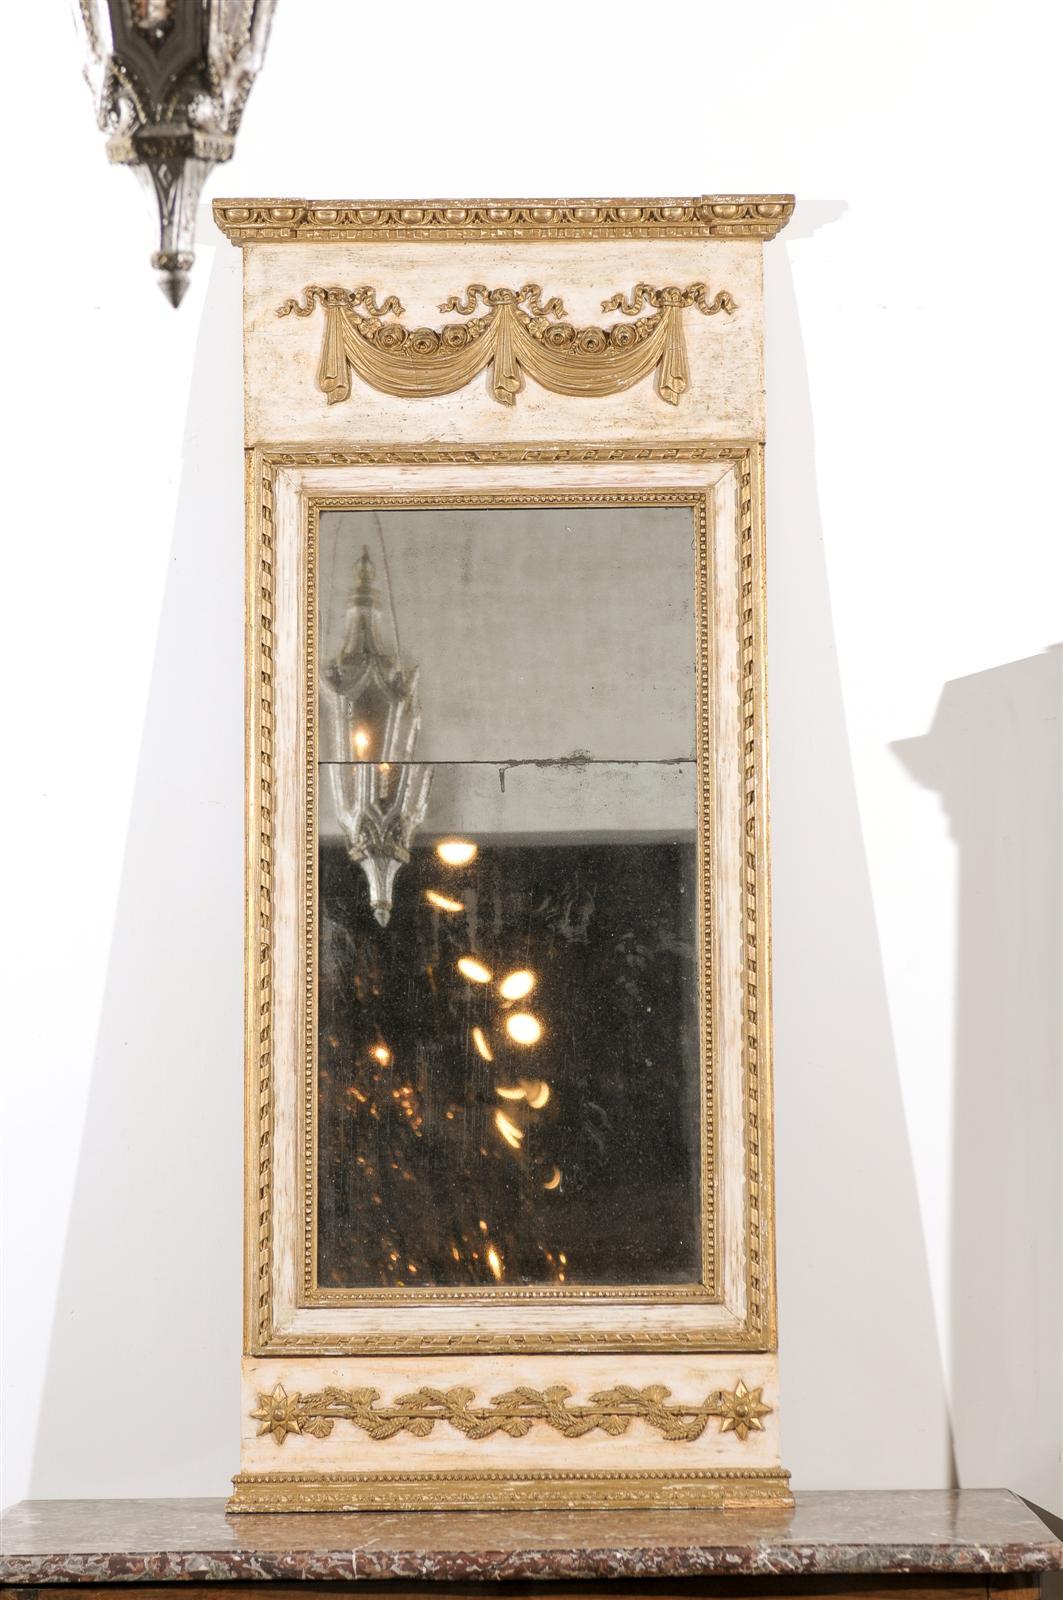 A Swedish period Gustavian painted and gilt trumeau mirror from the late 18th century with original paint and original split mercury glass. This exquisite Swedish trumeau mirror features a slender linear Silhouette, beautifully adorned with gilt